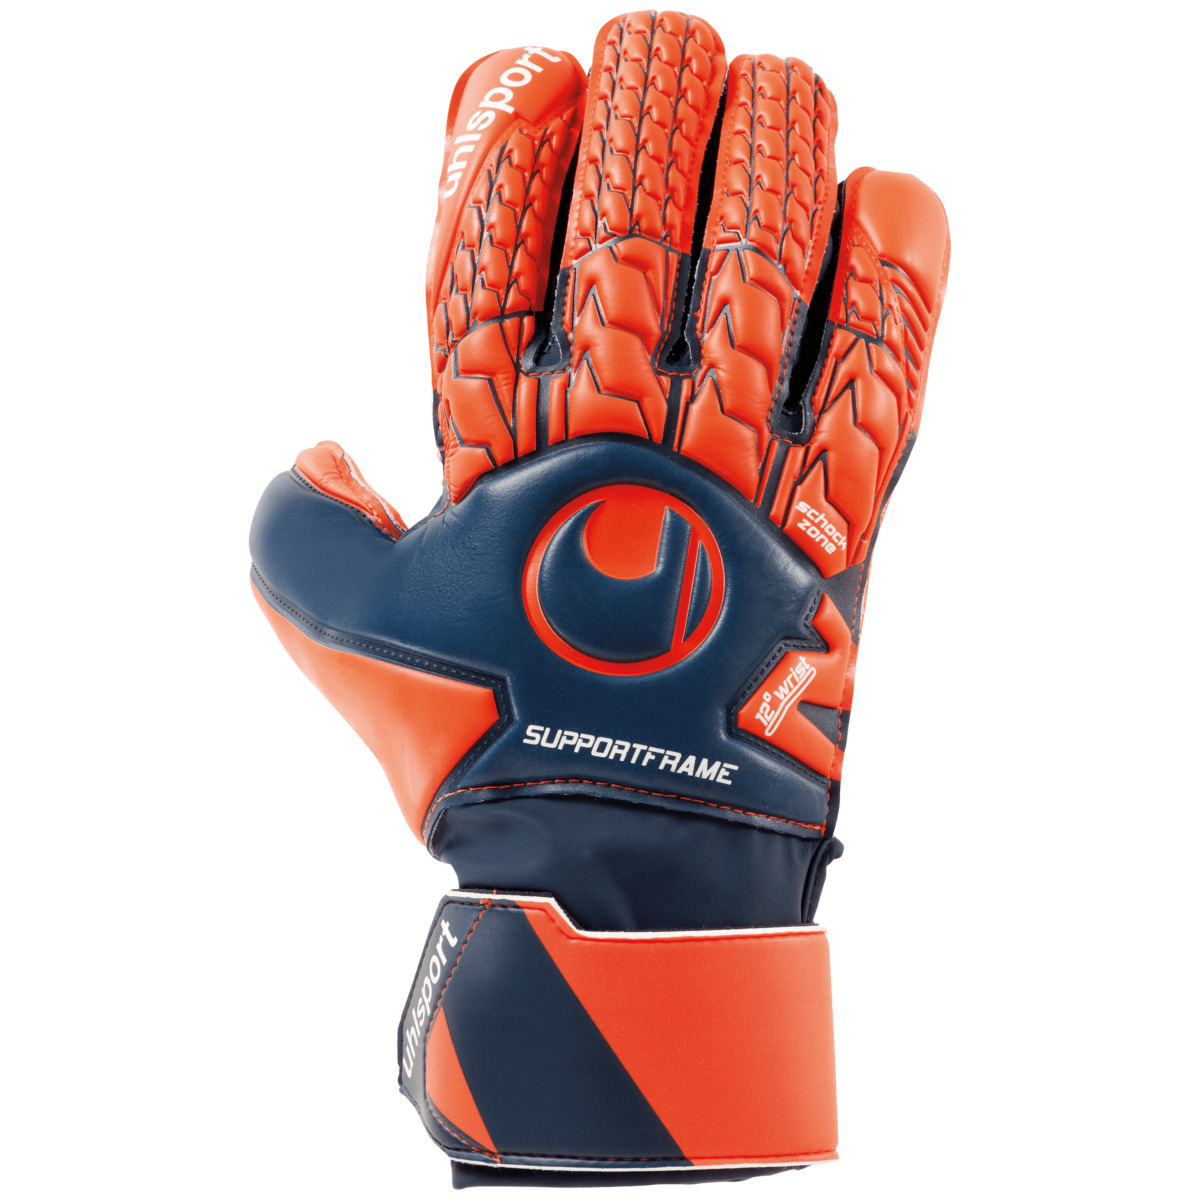 Uhlsport aerored Soft SF Junior Goalkeeper Glove with protectors Cheap Buy 